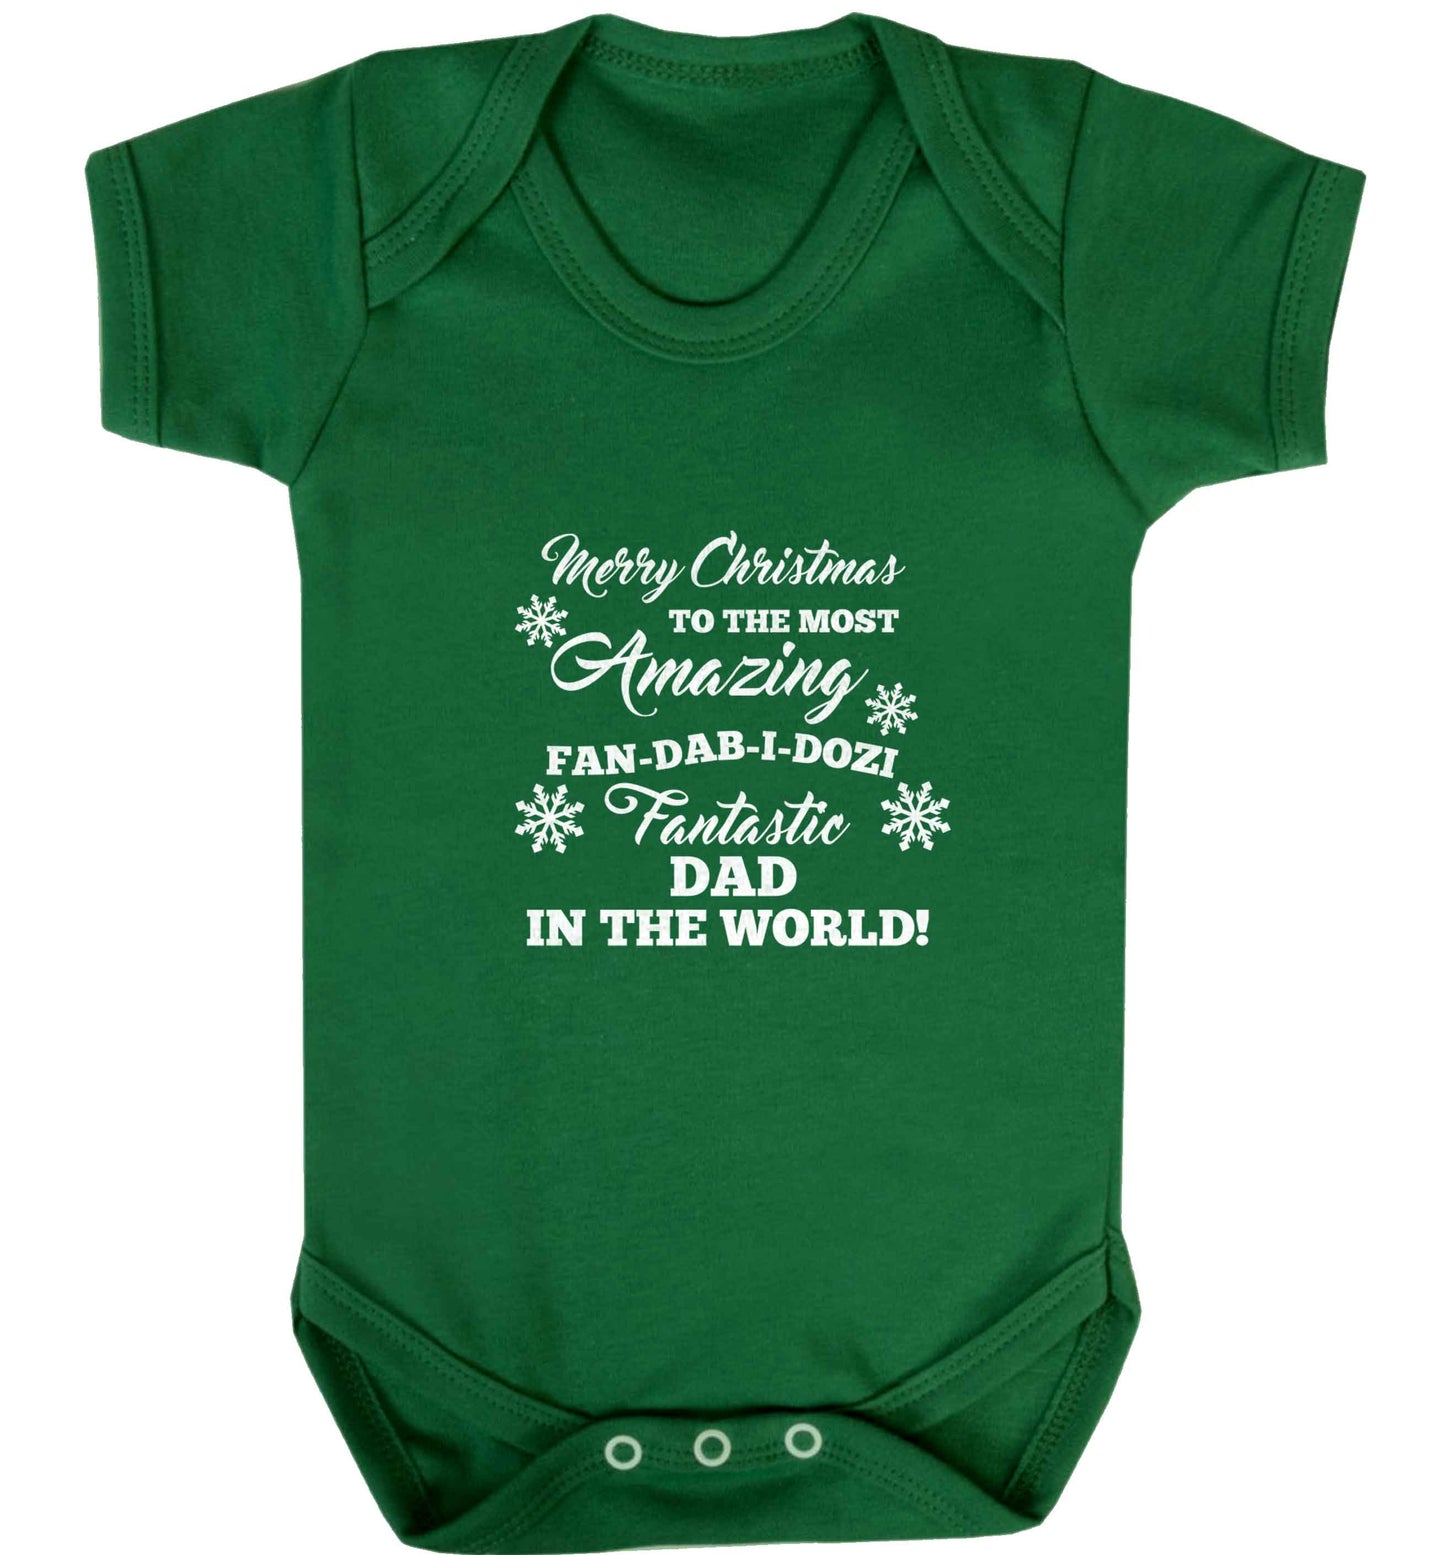 Merry Christmas to the most amazing fan-dab-i-dozi fantasic Dad in the world baby vest green 18-24 months